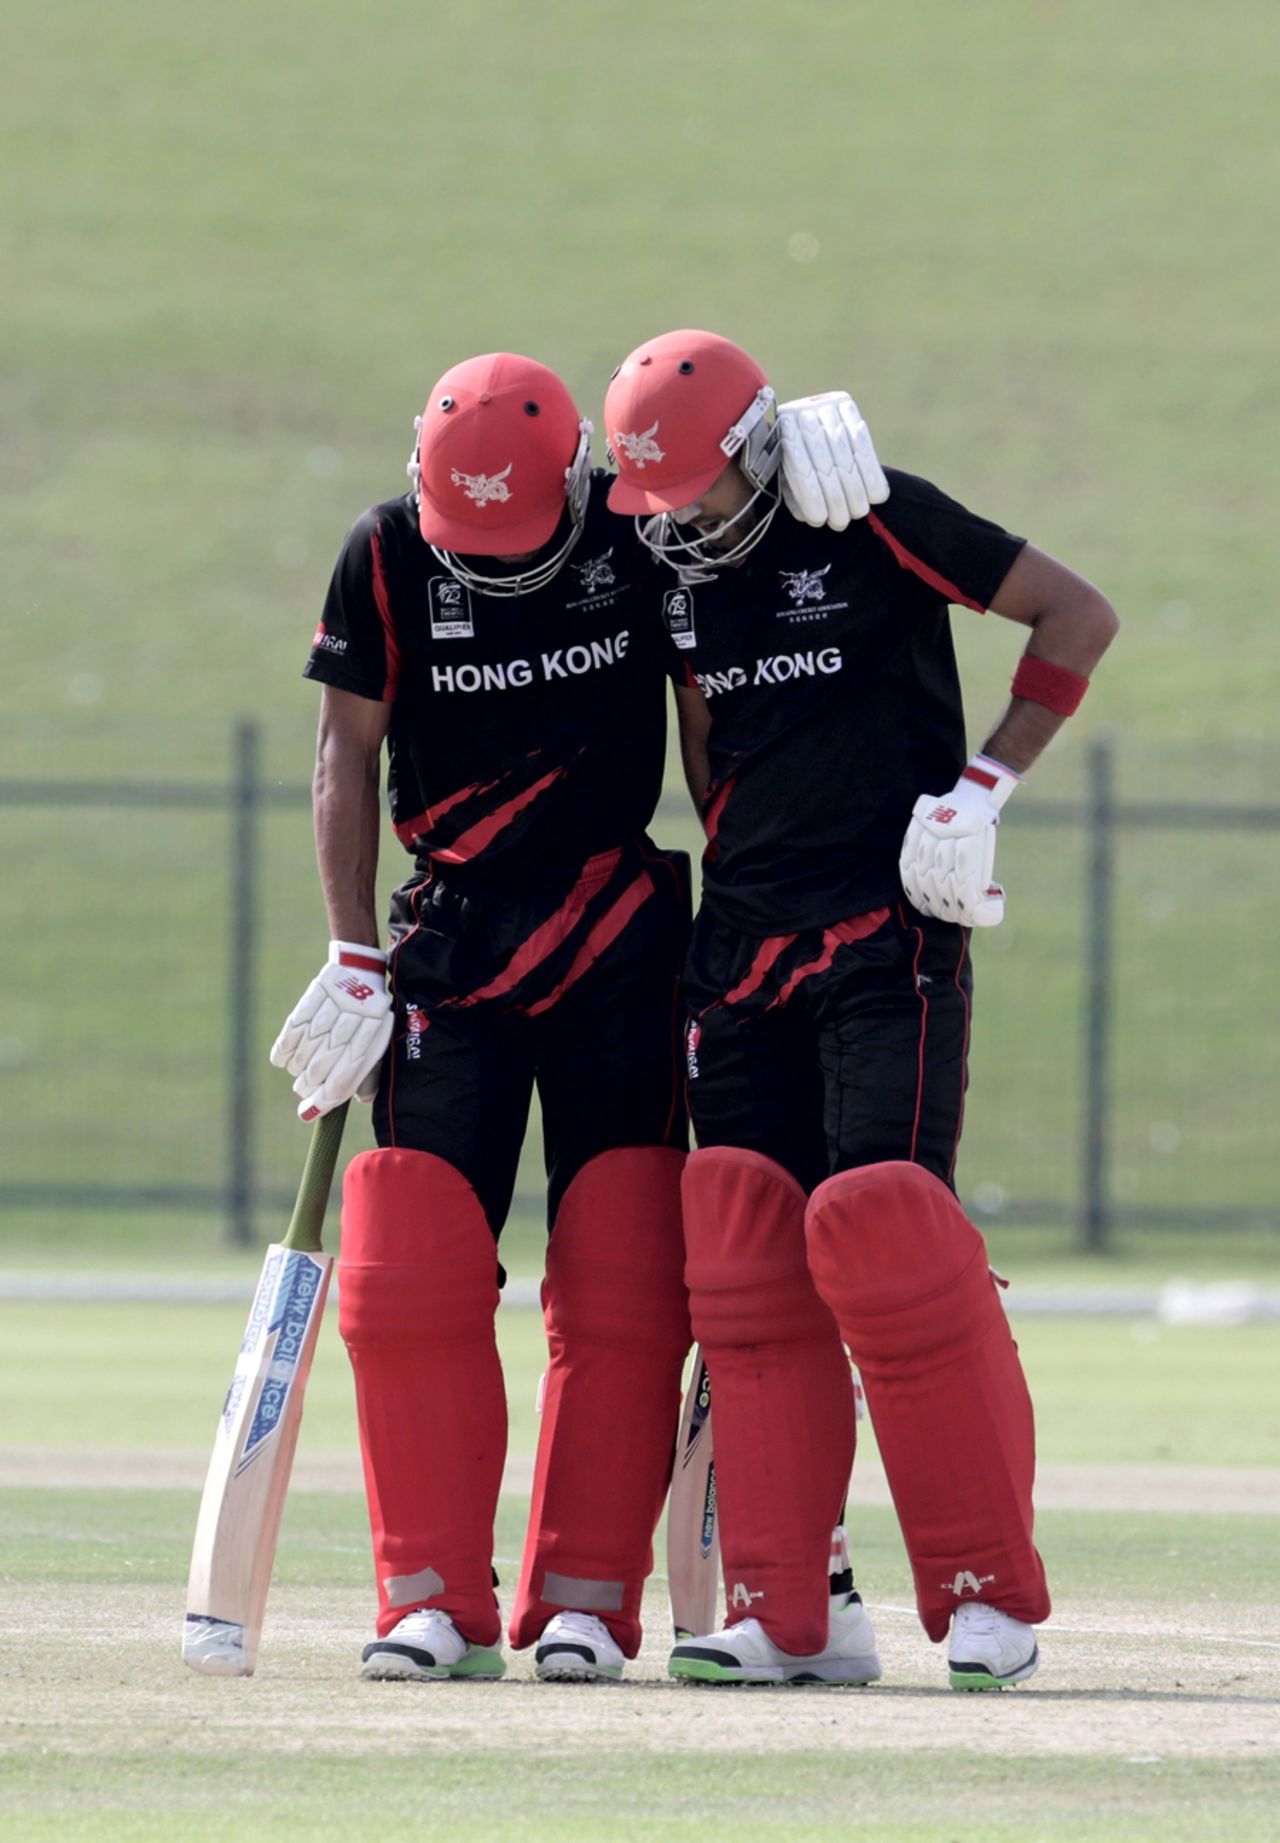 Waqas Barkat (L) and Irfan Ahmed of Hong Kong confer during the Hong Kong v UAE match at the ICC World Twenty20 Qualifiers at the Zayed Cricket Stadium on November 19, 2013 in Abu Dhabi, United Arab Emirates. (Photo by Graham Crouch-IDI/IDI via Getty Images)